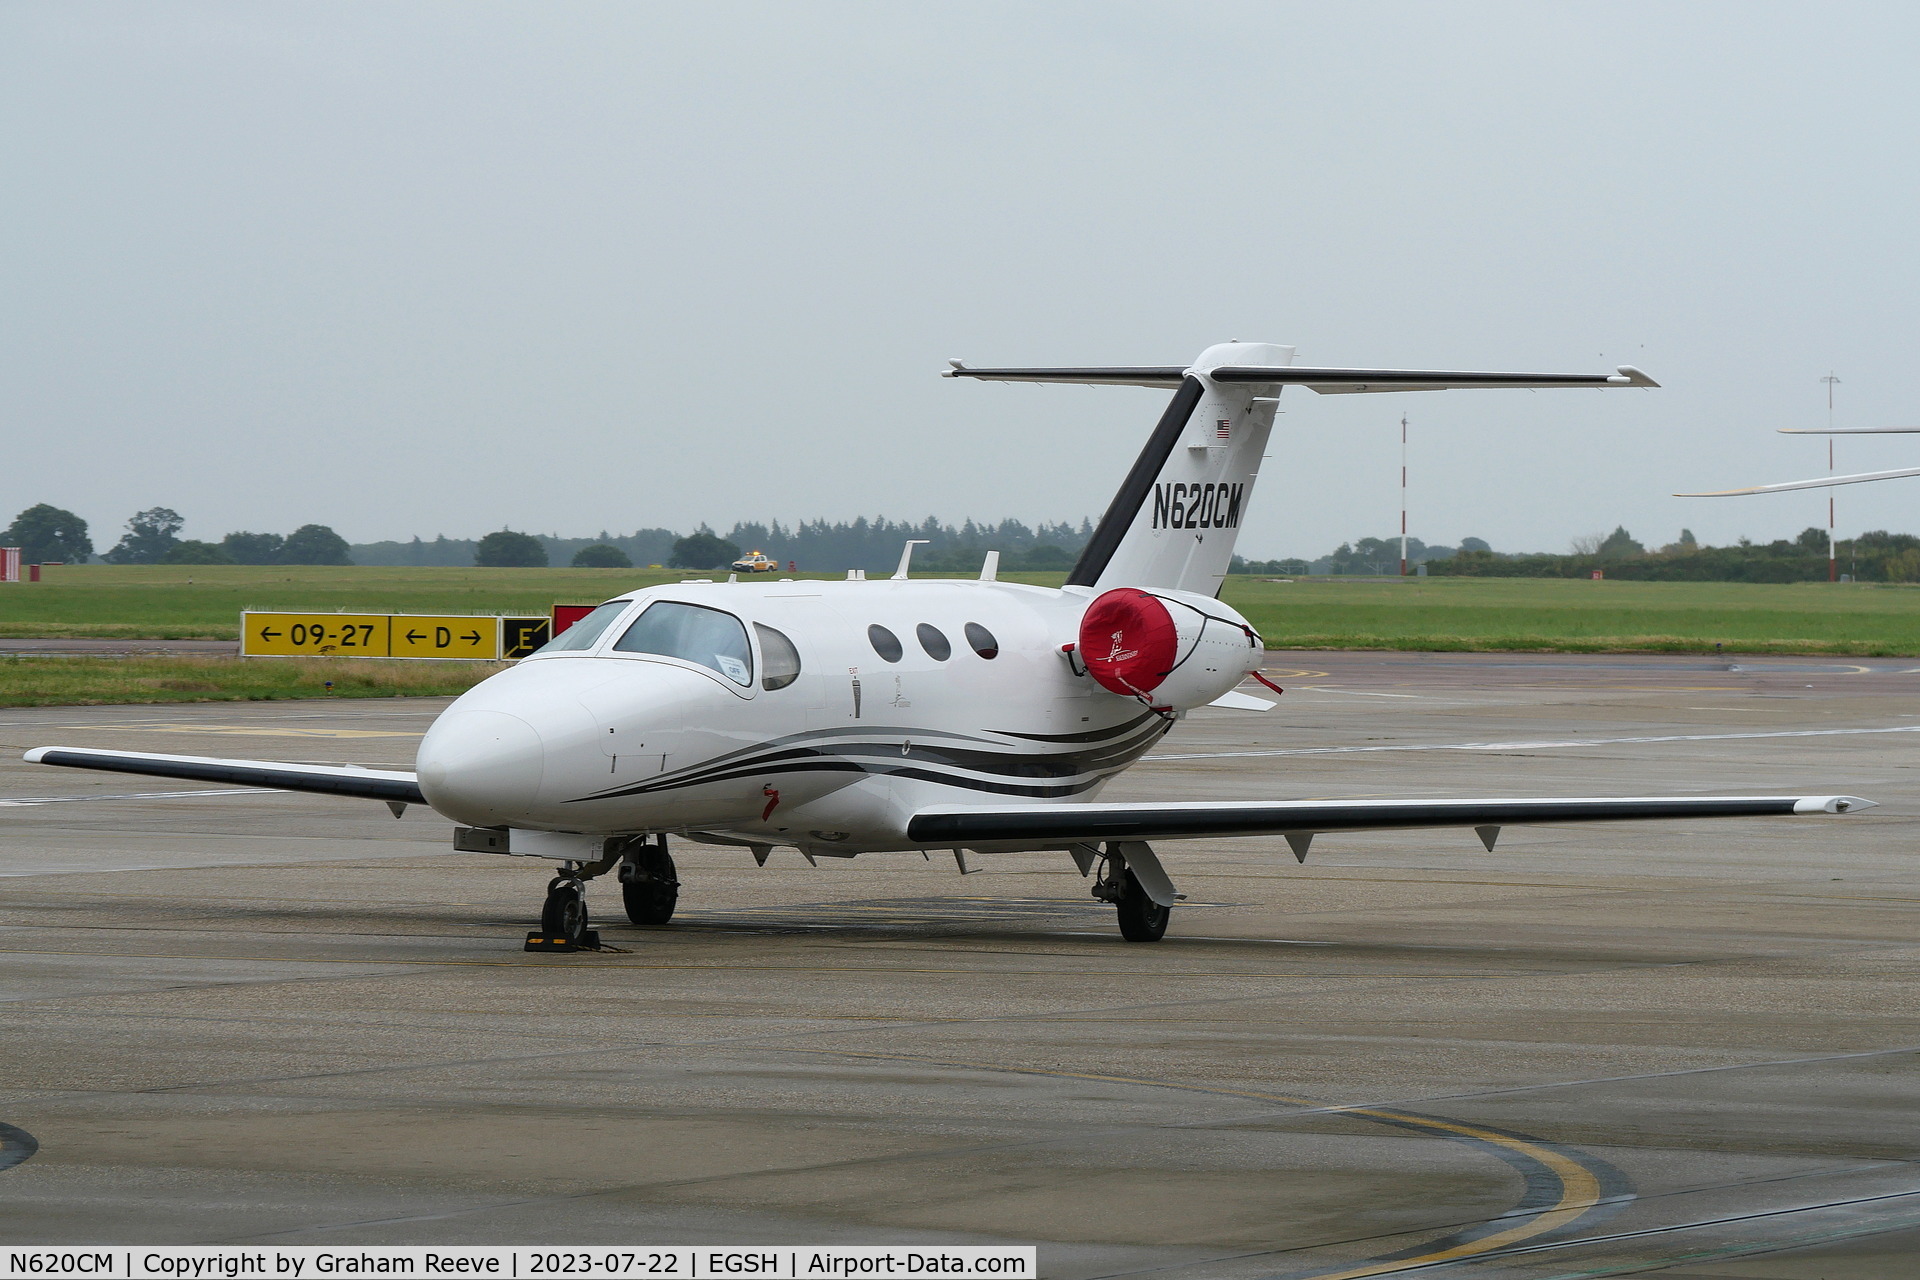 N620CM, 2000 Cessna 510 Citation Mustang Citation Mustang C/N 510-0206, Parked at Norwich.